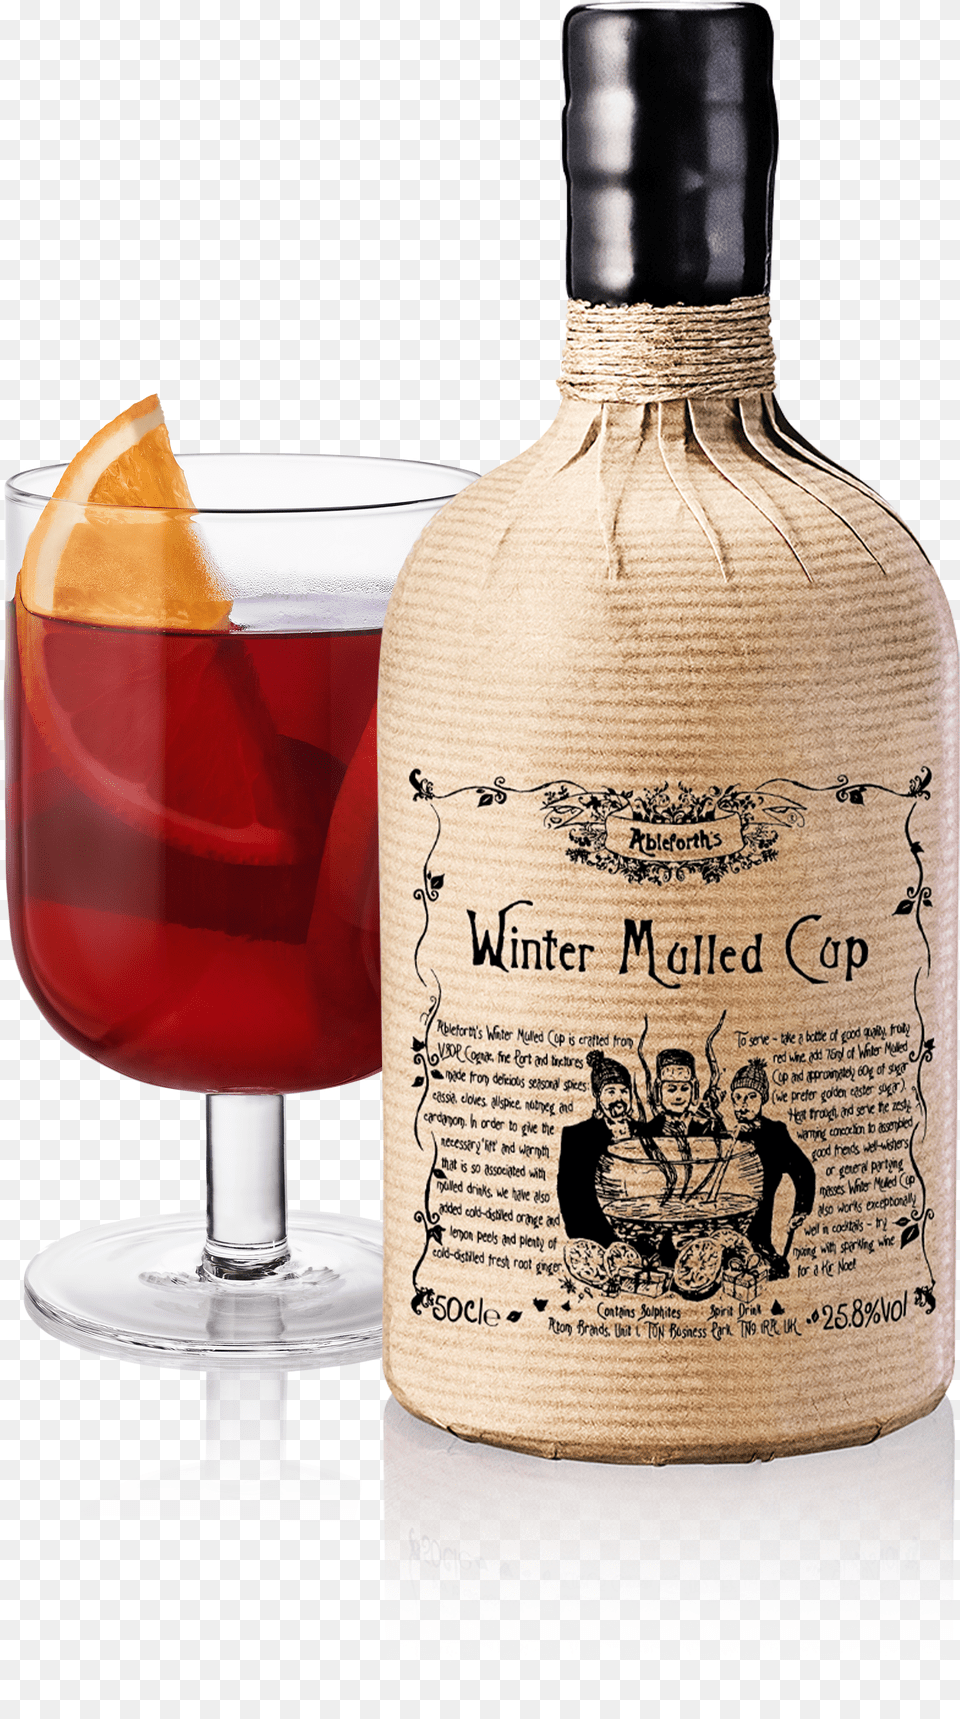 Winter Mulled Cup Amp Mulled Wine Glass Bottle Png Image